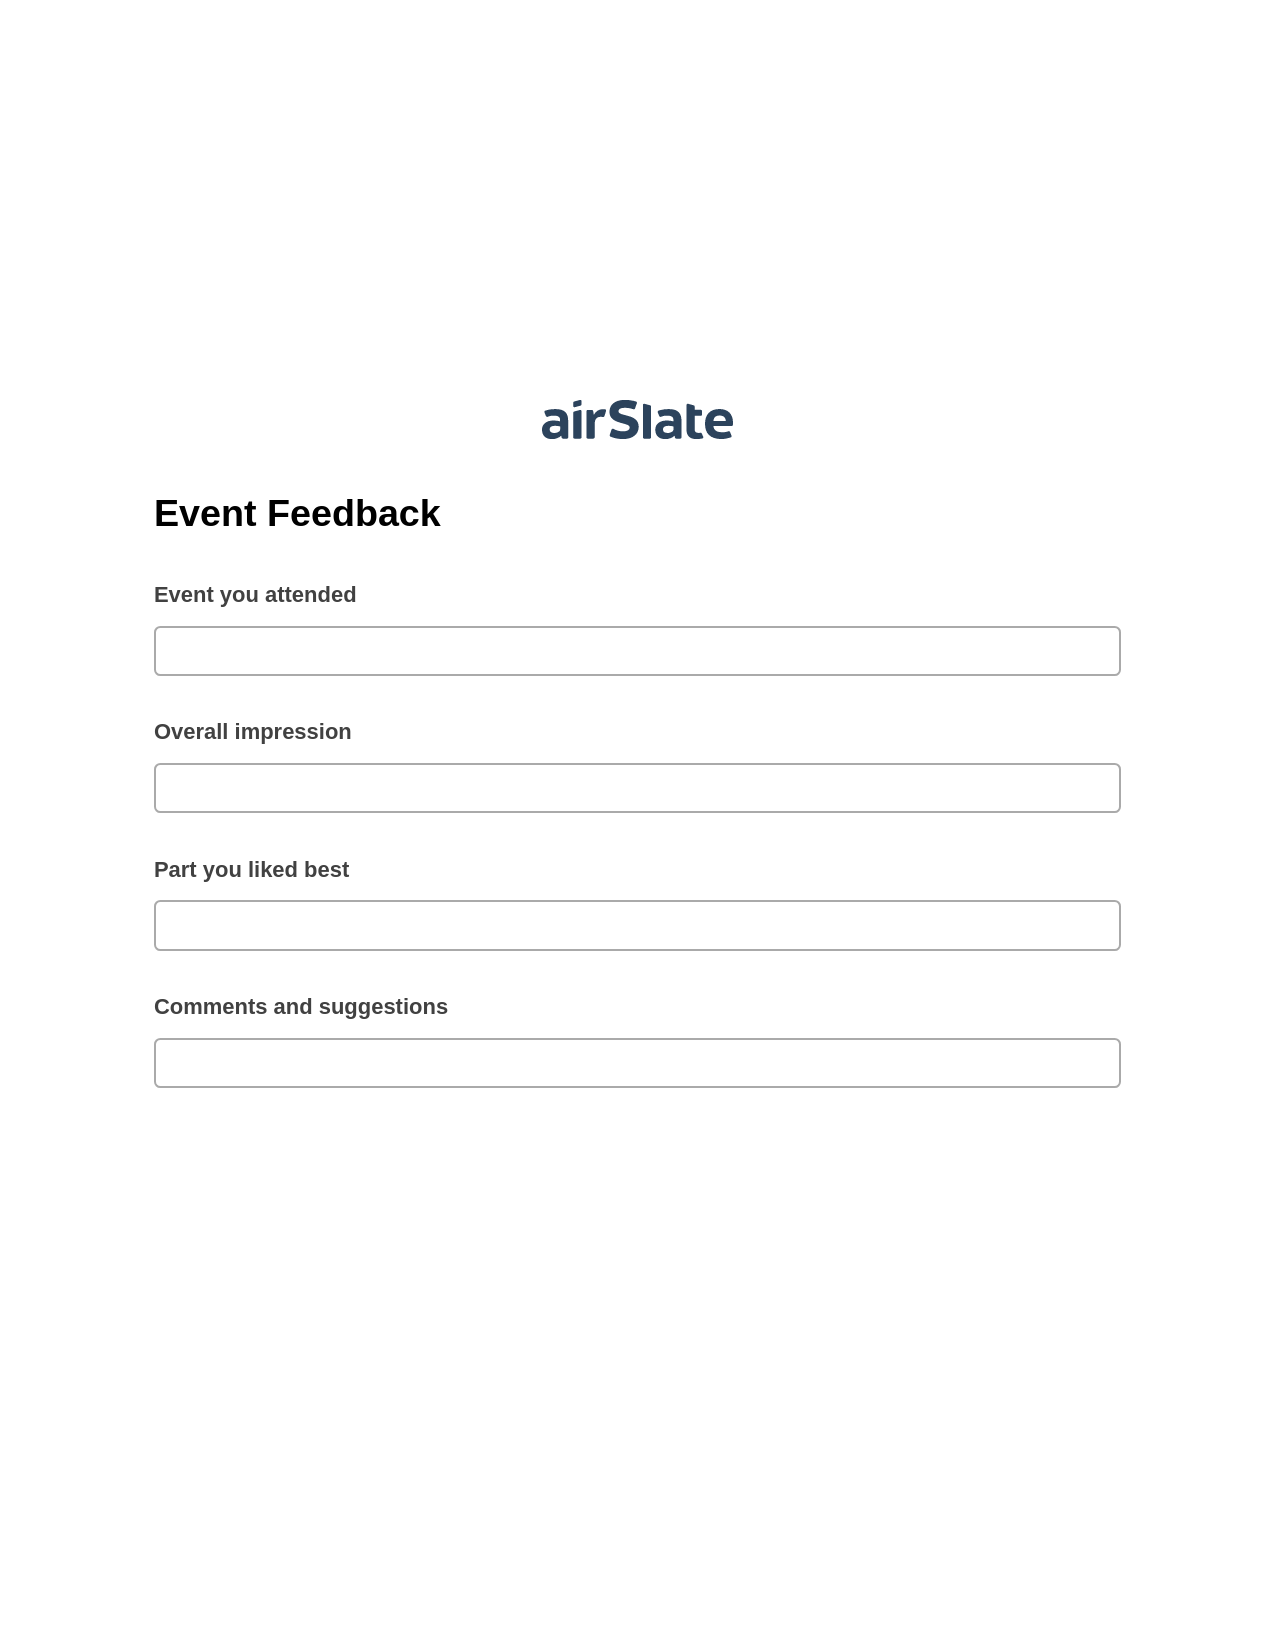 Event Feedback Pre-fill from Salesforce Records with SOQL Bot, Assign Slate Name Bot, Export to Smartsheet